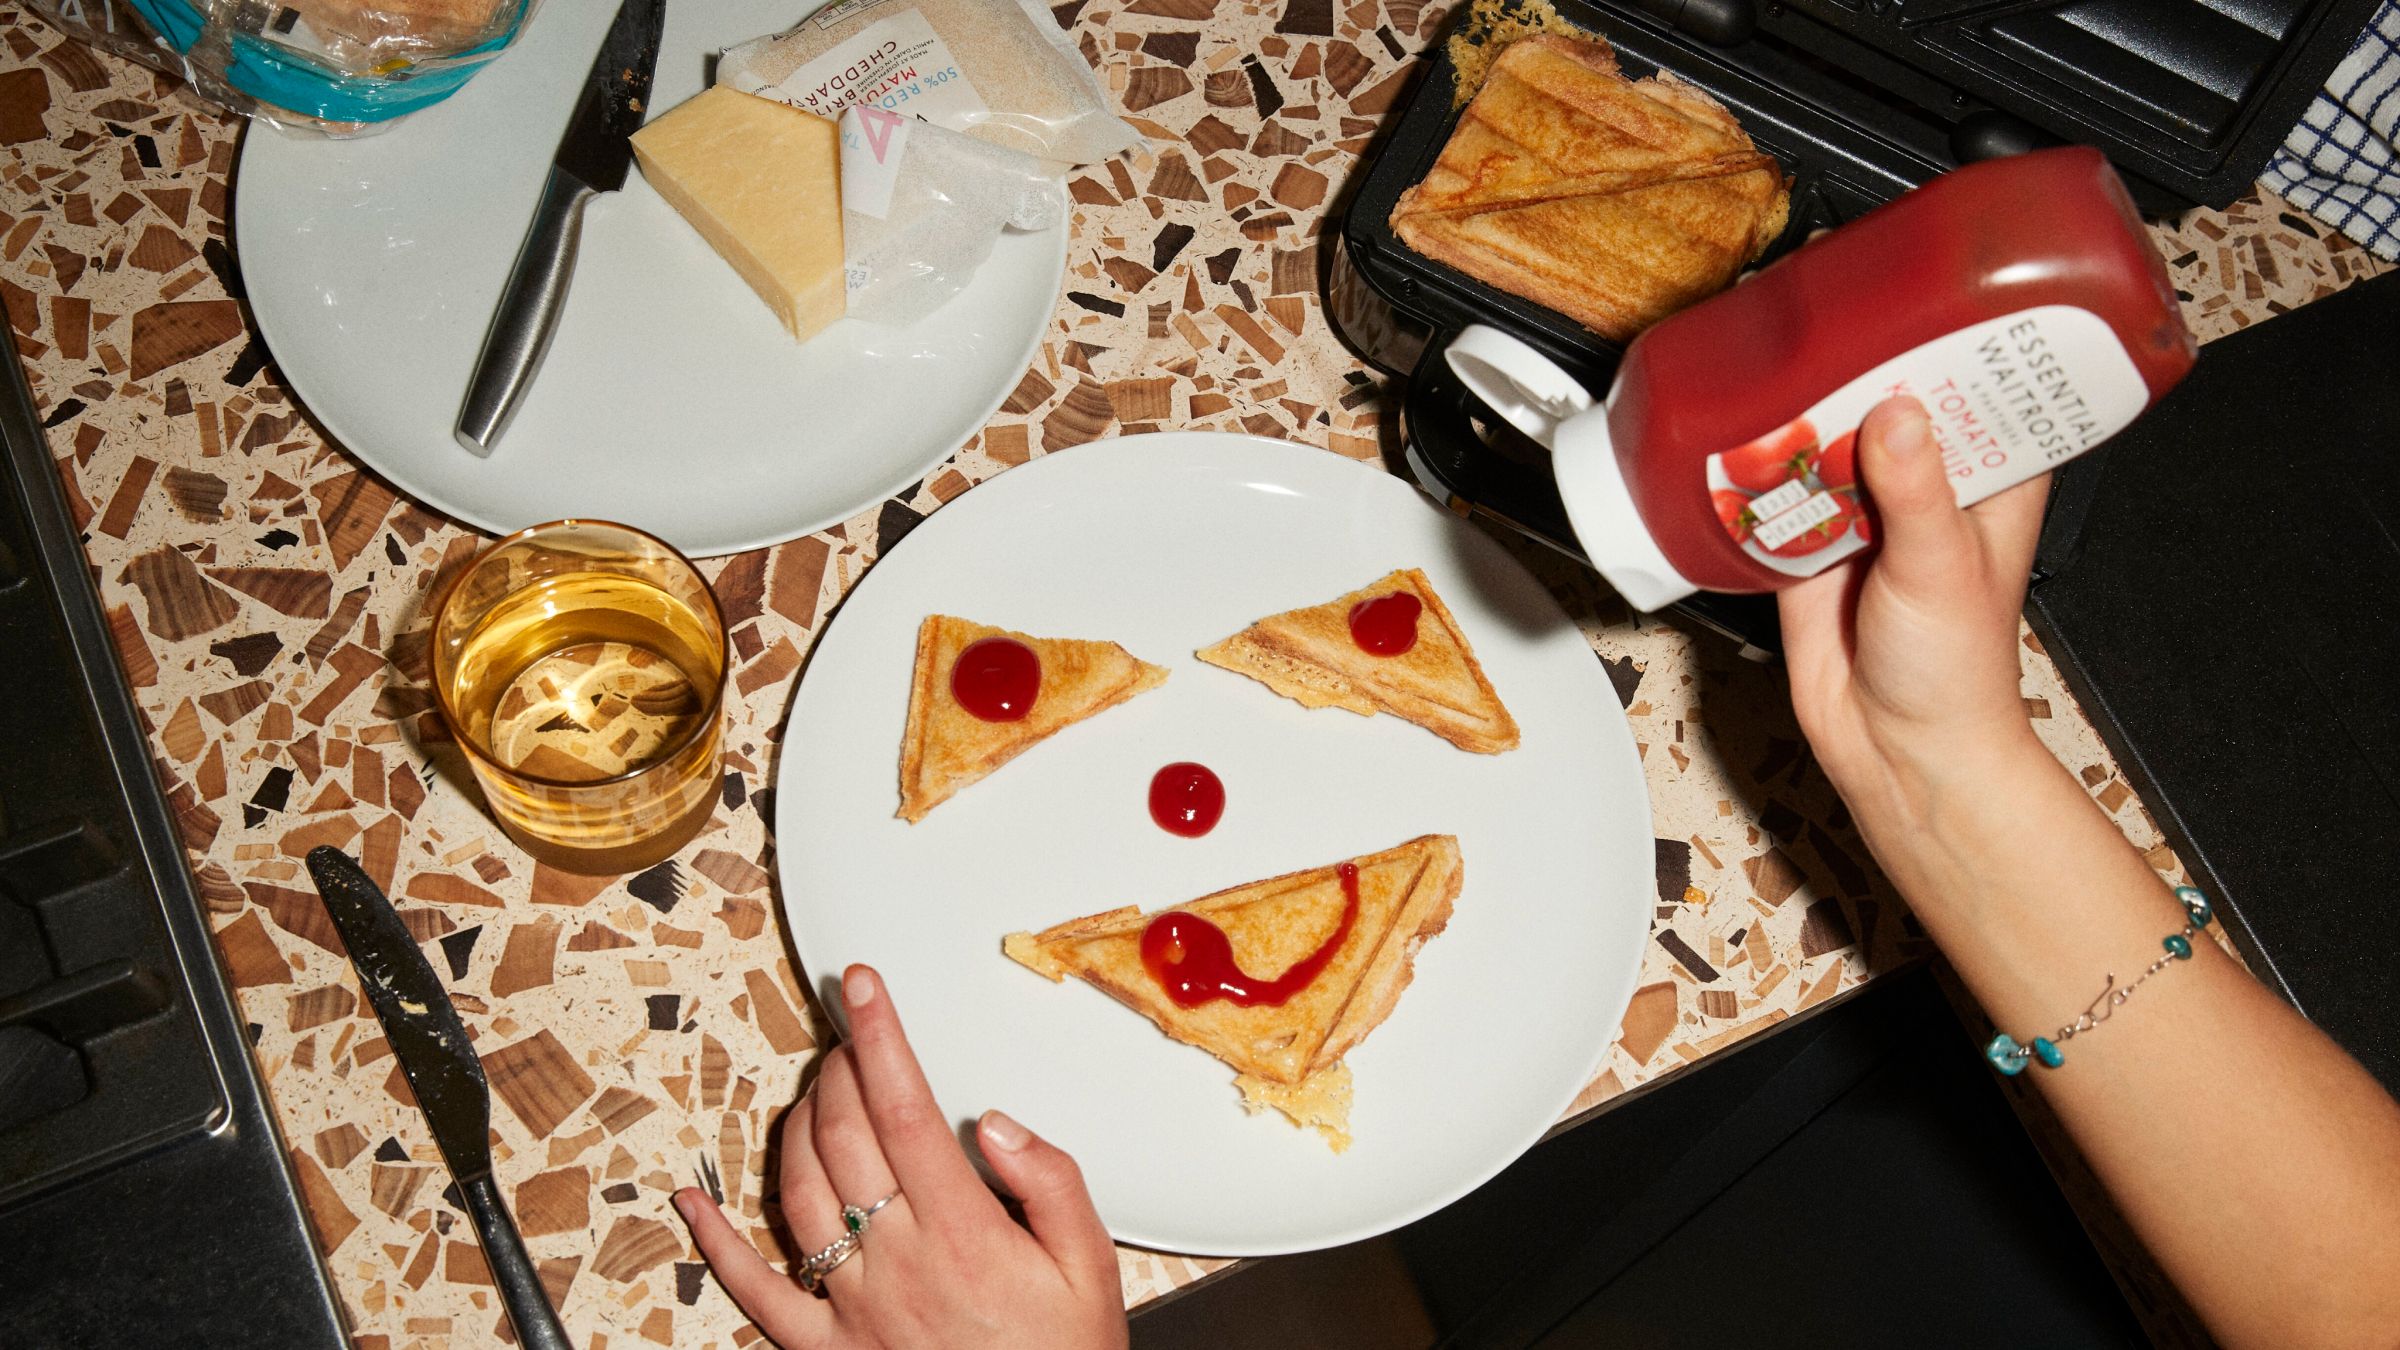 Image of a toastie maker and a student painting smily faces with ketchup on their cheese toastie